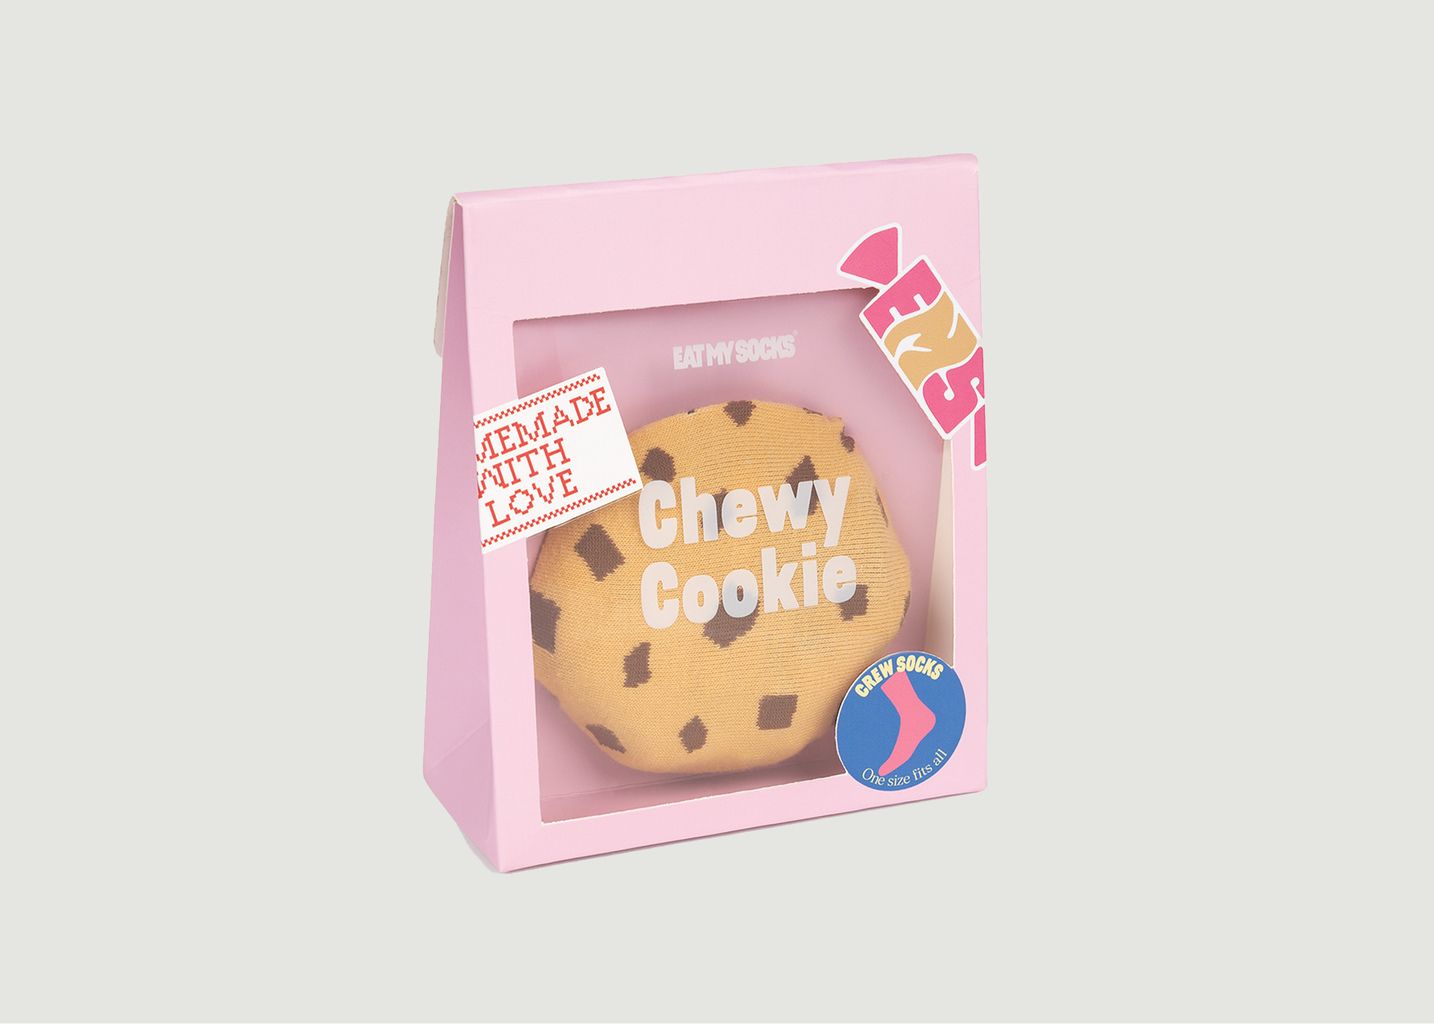 Chaussettes Chewy Cookie  - Eat my socks